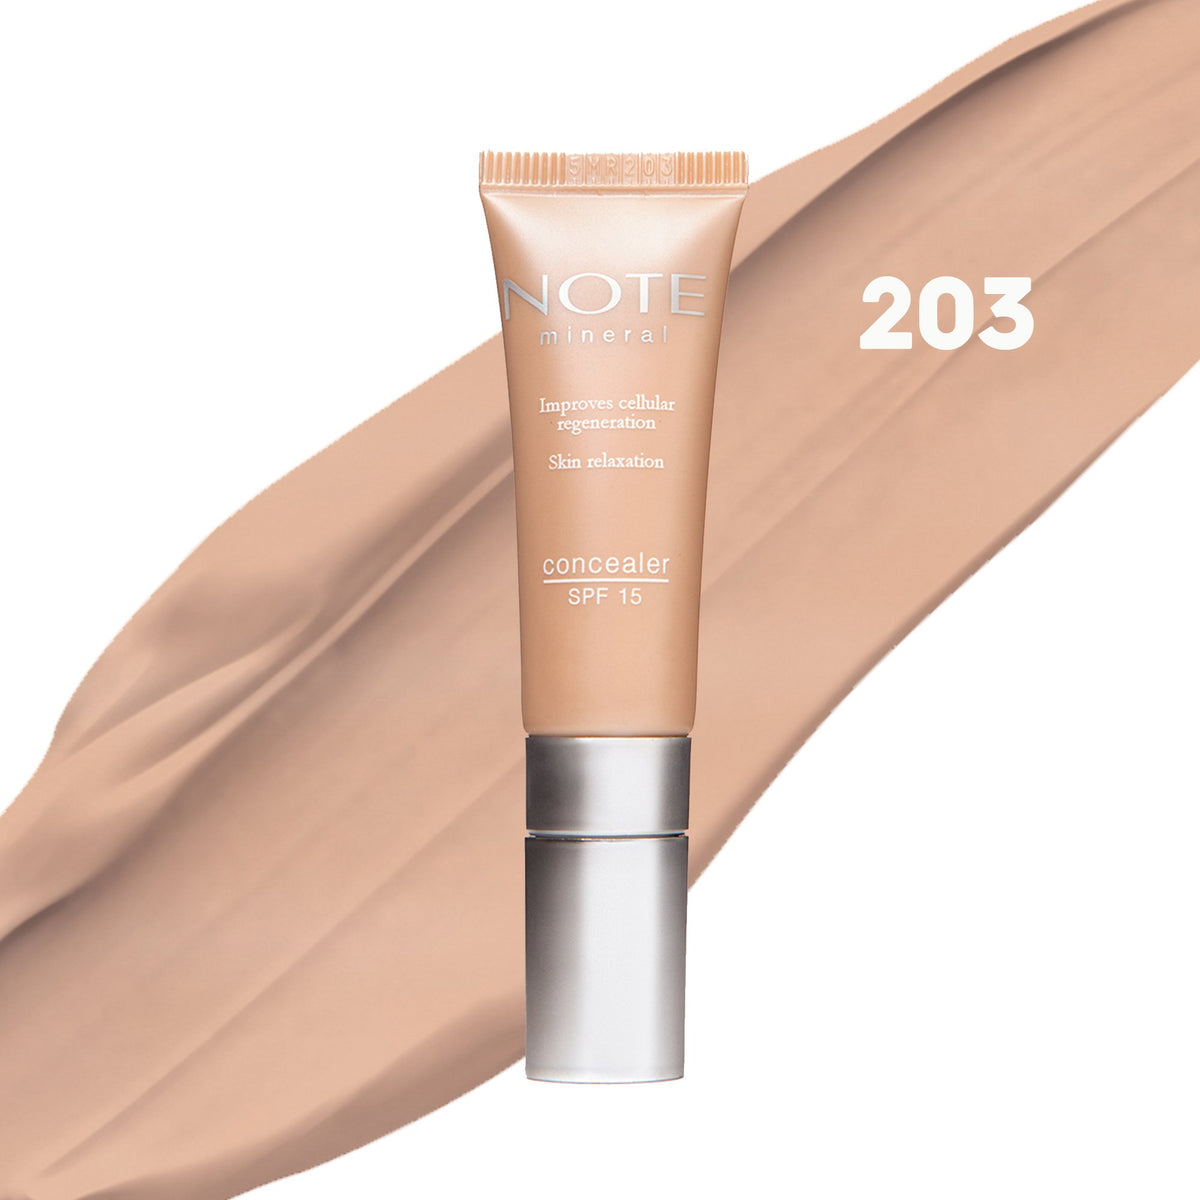 NOTE MINERAL CONCEALER - Halal Concealer, Cruelty Free Concealer, Vegan Concealer, Paraben Free Concealer, Long Lasting, Full Coverage, Lightweight, Crease Proof, Complexion Perfecting